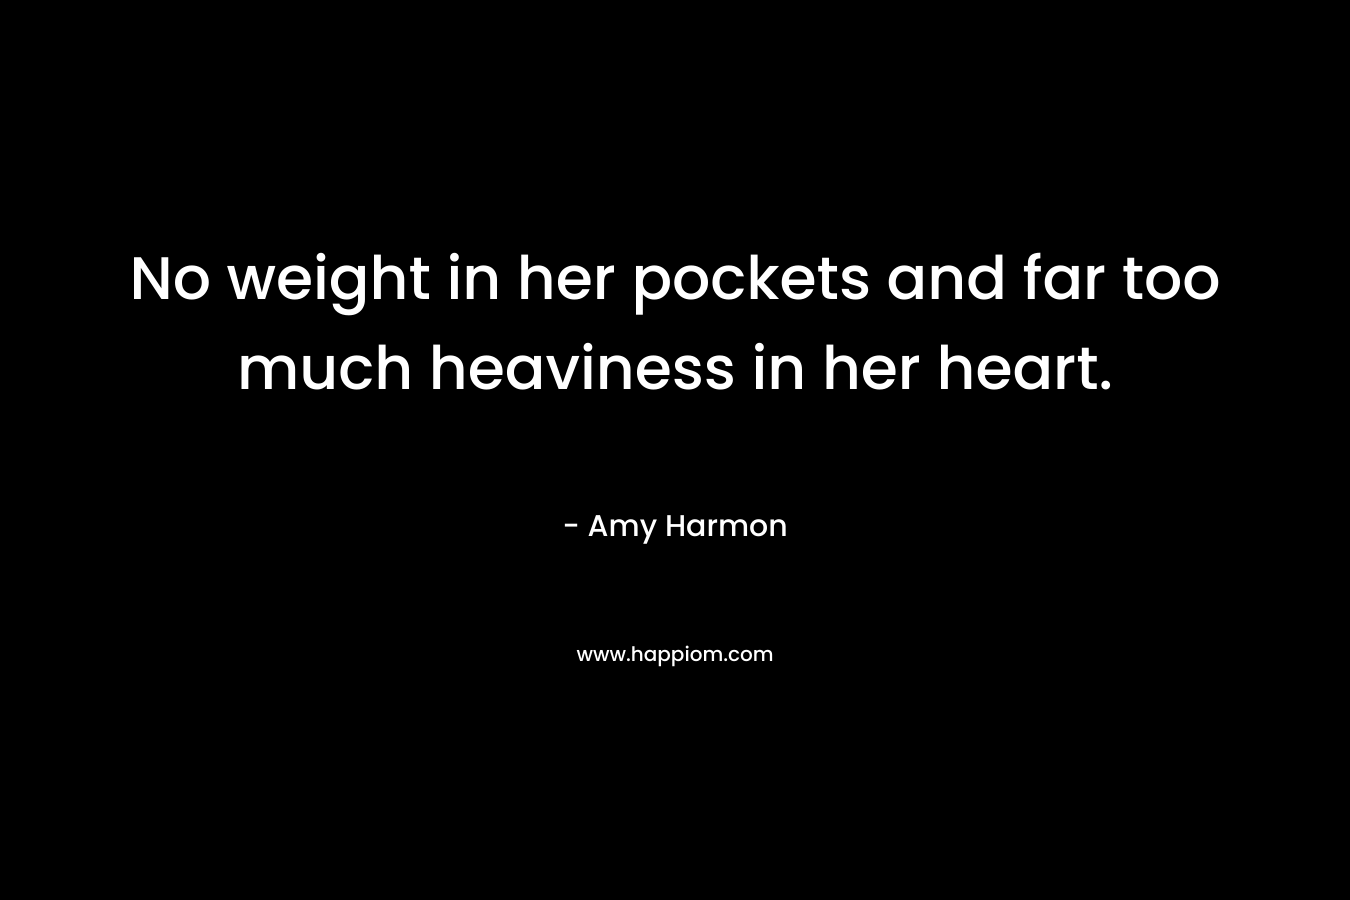 No weight in her pockets and far too much heaviness in her heart. – Amy Harmon